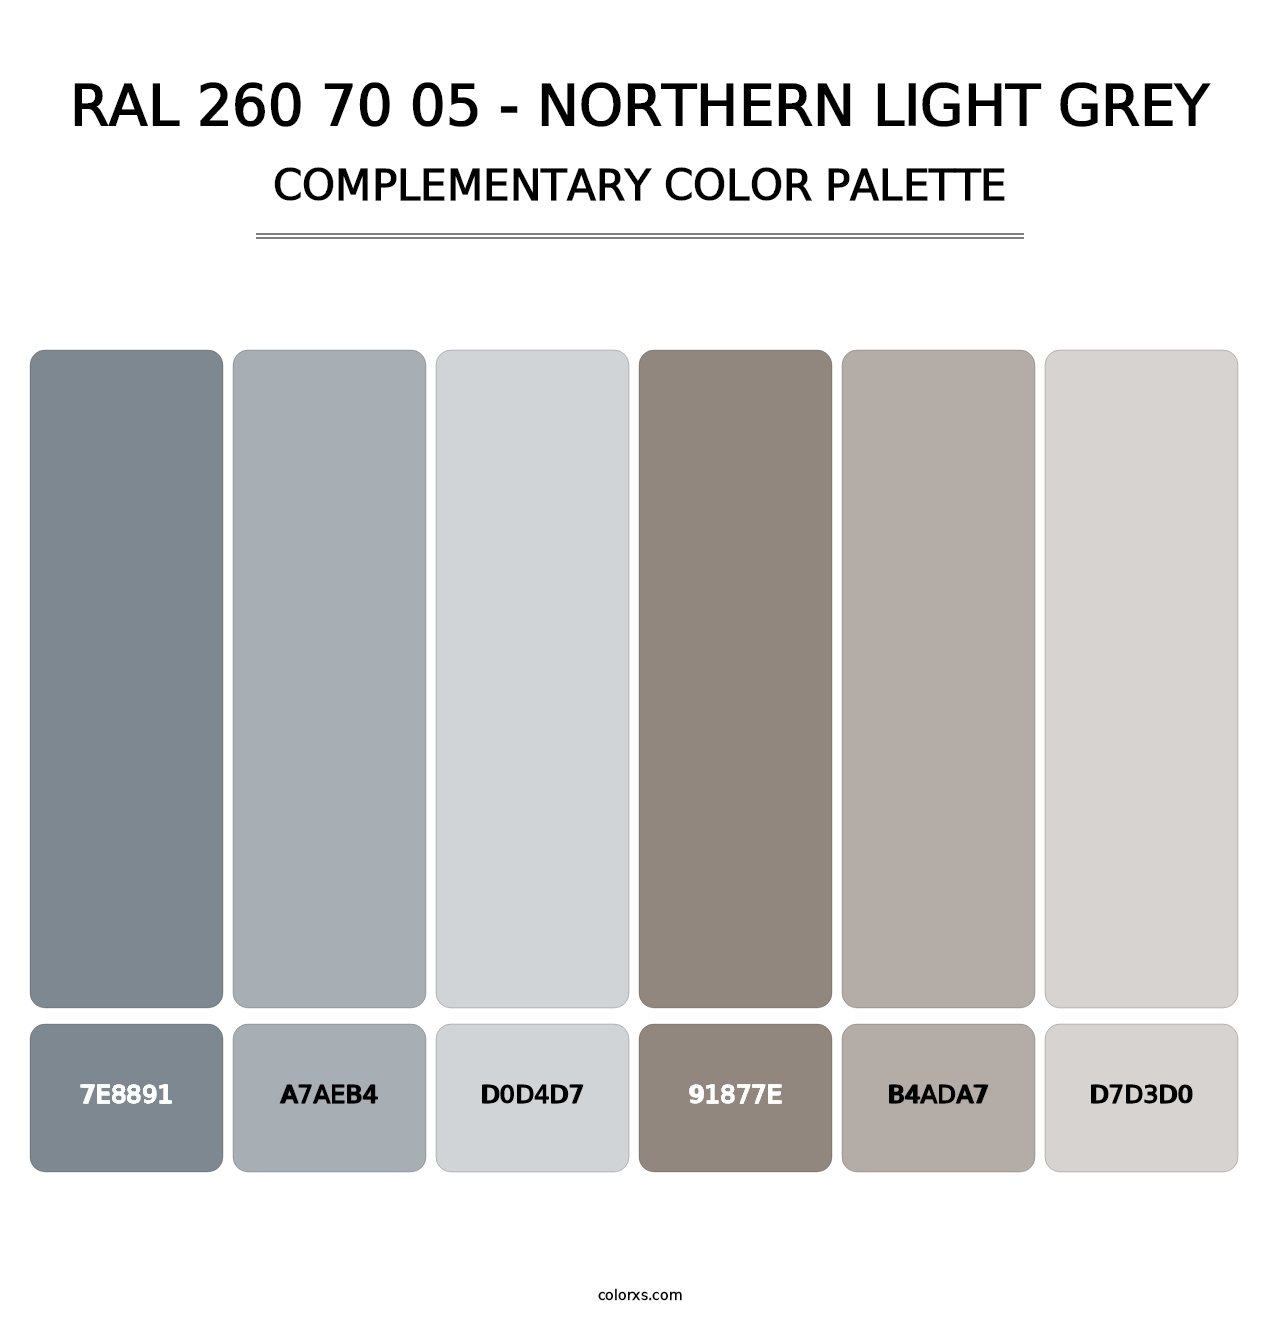 RAL 260 70 05 - Northern Light Grey - Complementary Color Palette